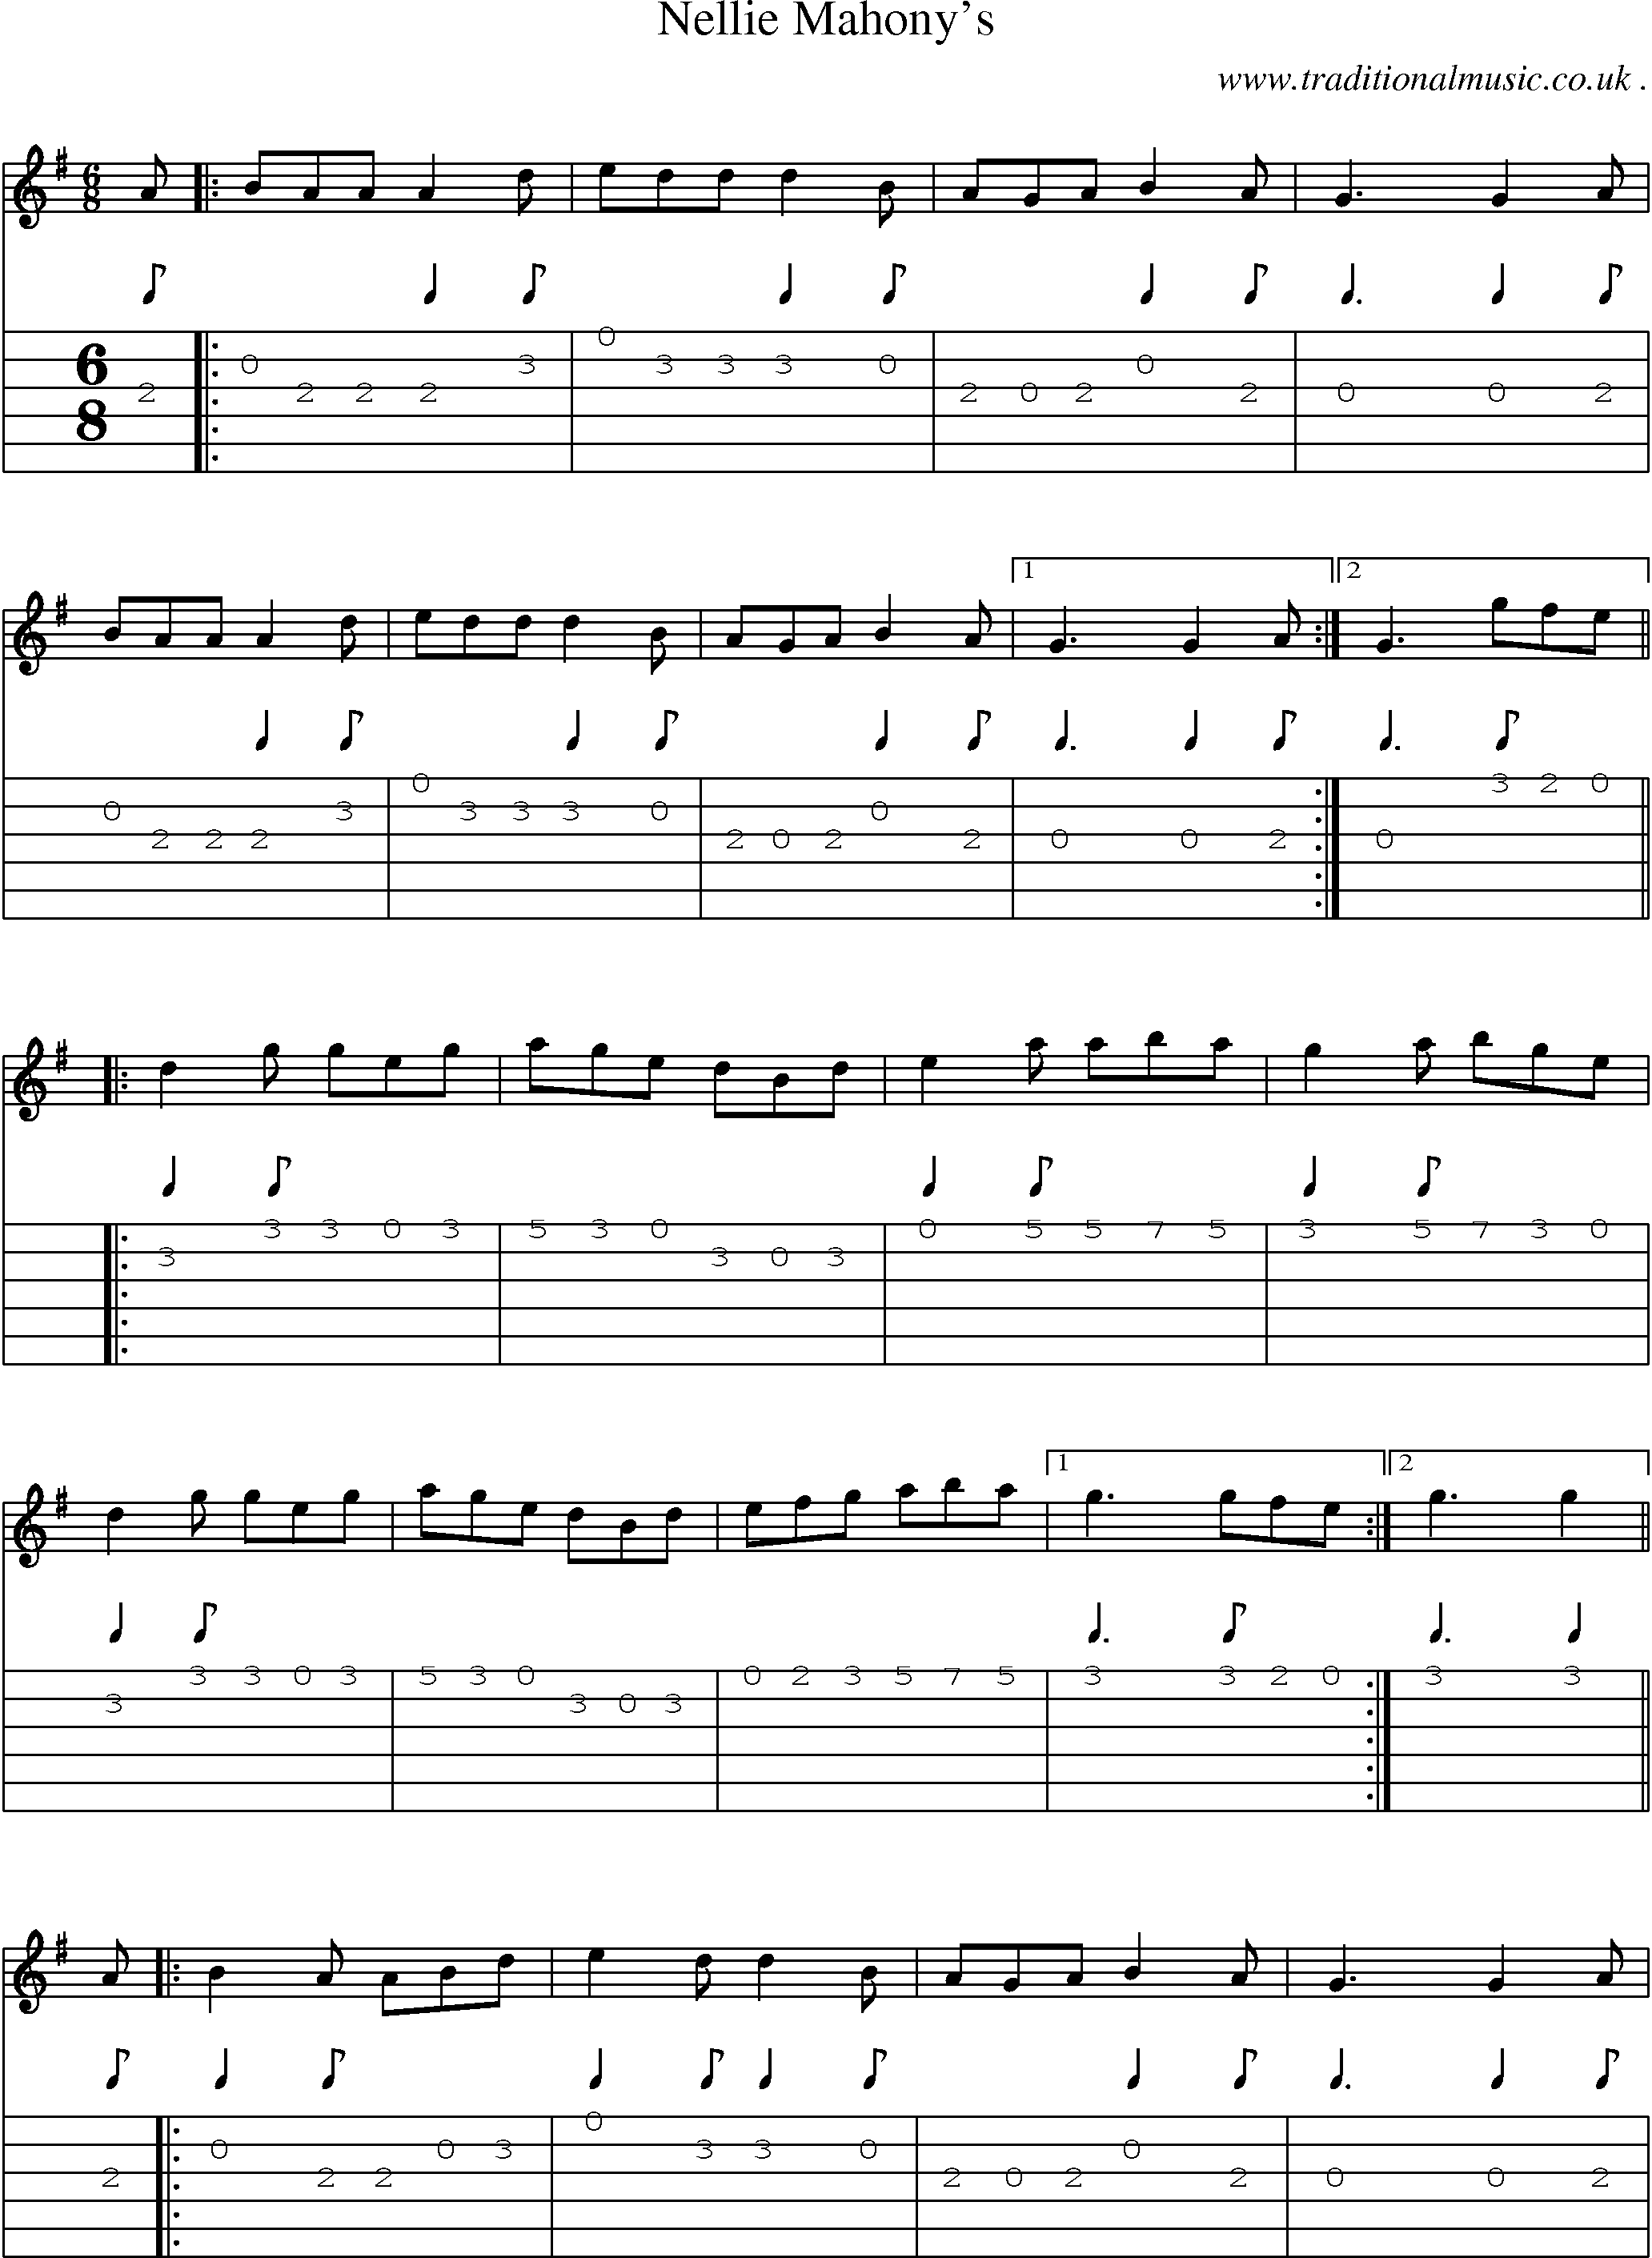 Sheet-Music and Guitar Tabs for Nellie Mahonys